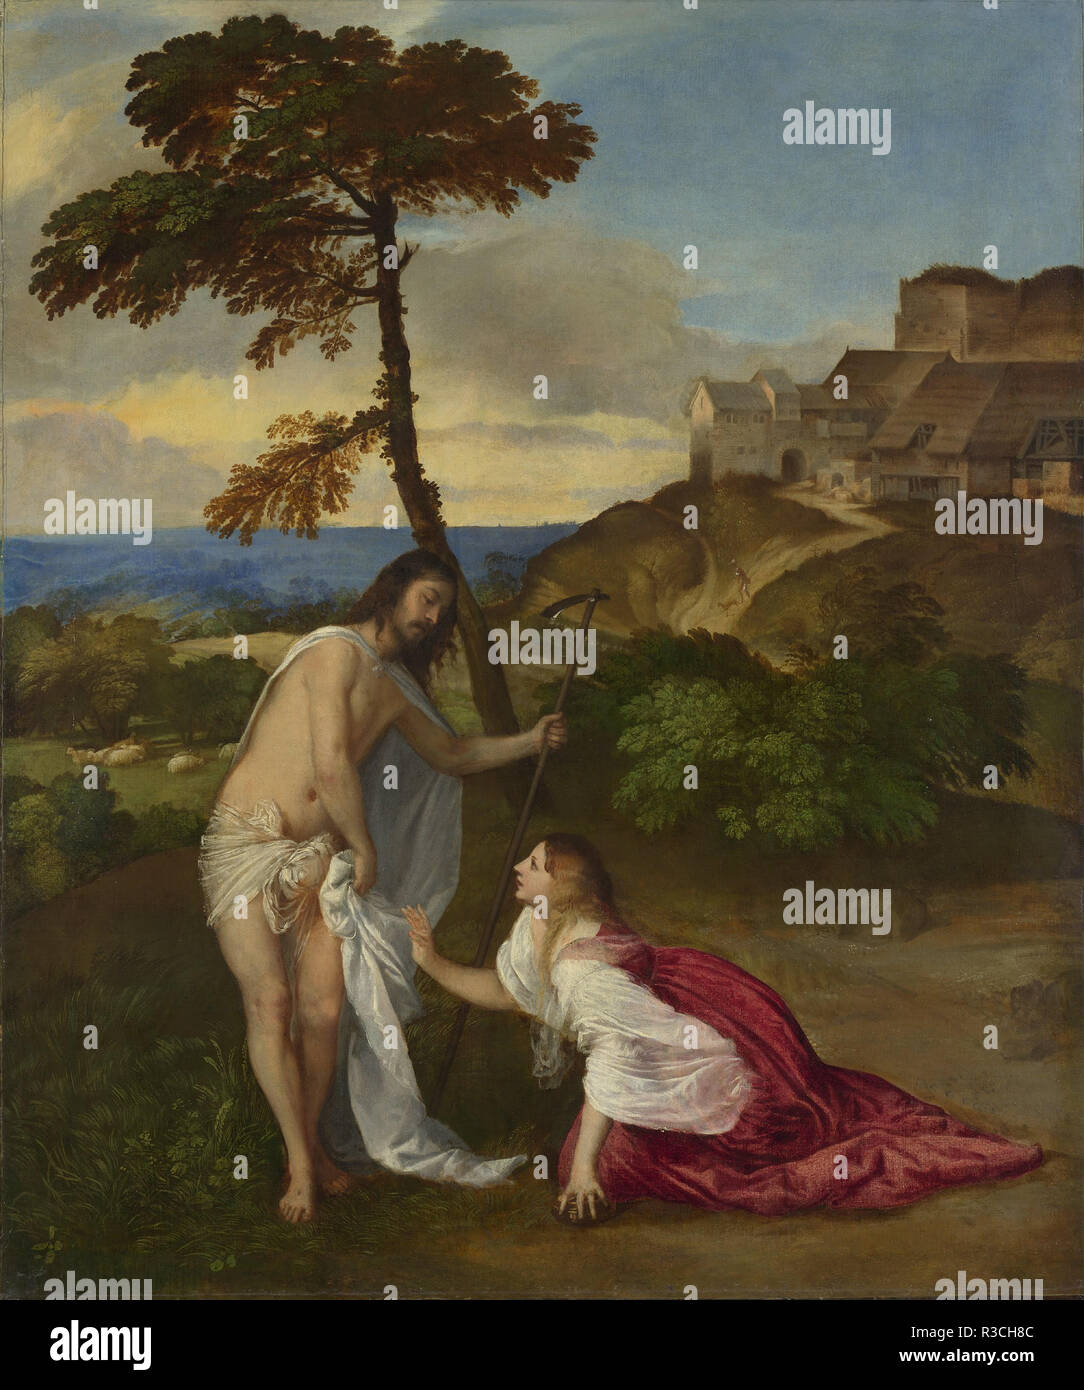 Noli me Tangere. Date/Period: 1511 / 1510s. Painting. Oil on canvas. Height: 110.5 cm (43.5 in); Width: 91.9 cm (36.1 in). Author: TITIAN. Stock Photo